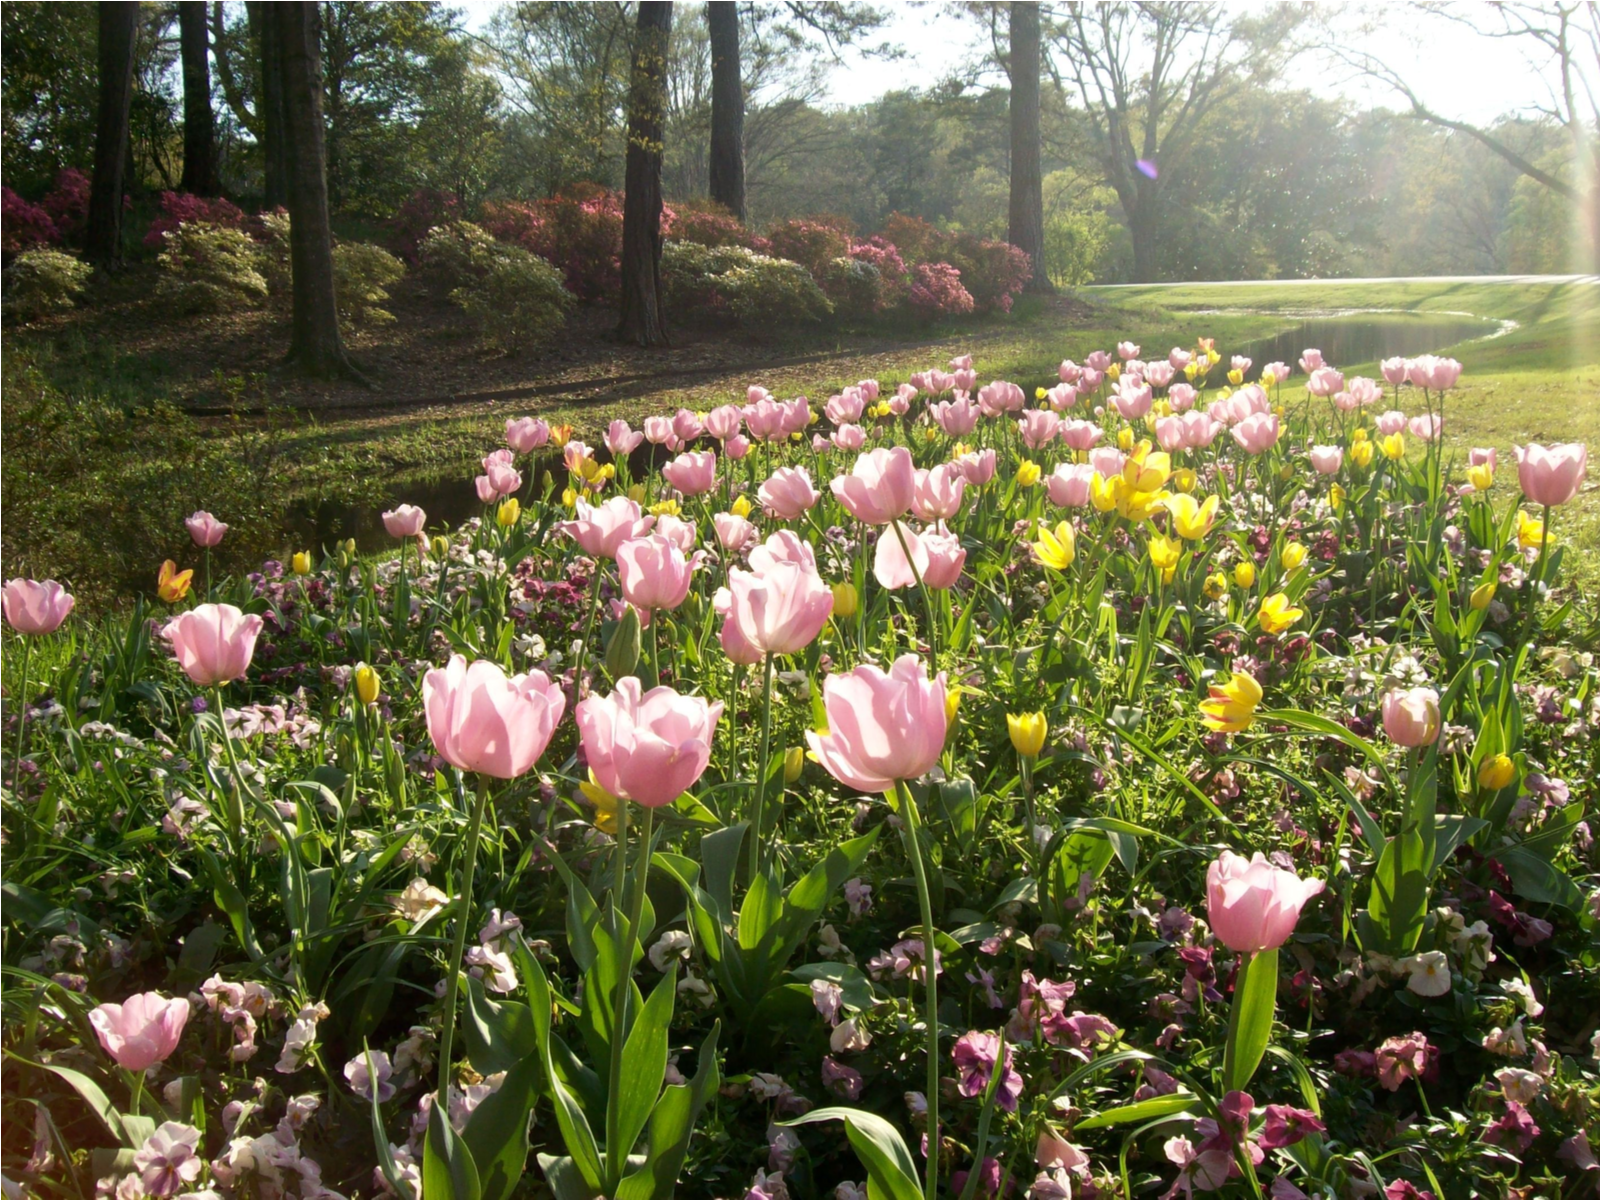 A pocket of Spring Tulips on a refreshing morning at one of the best tourist attractions in Georgia, Callaway Gardens